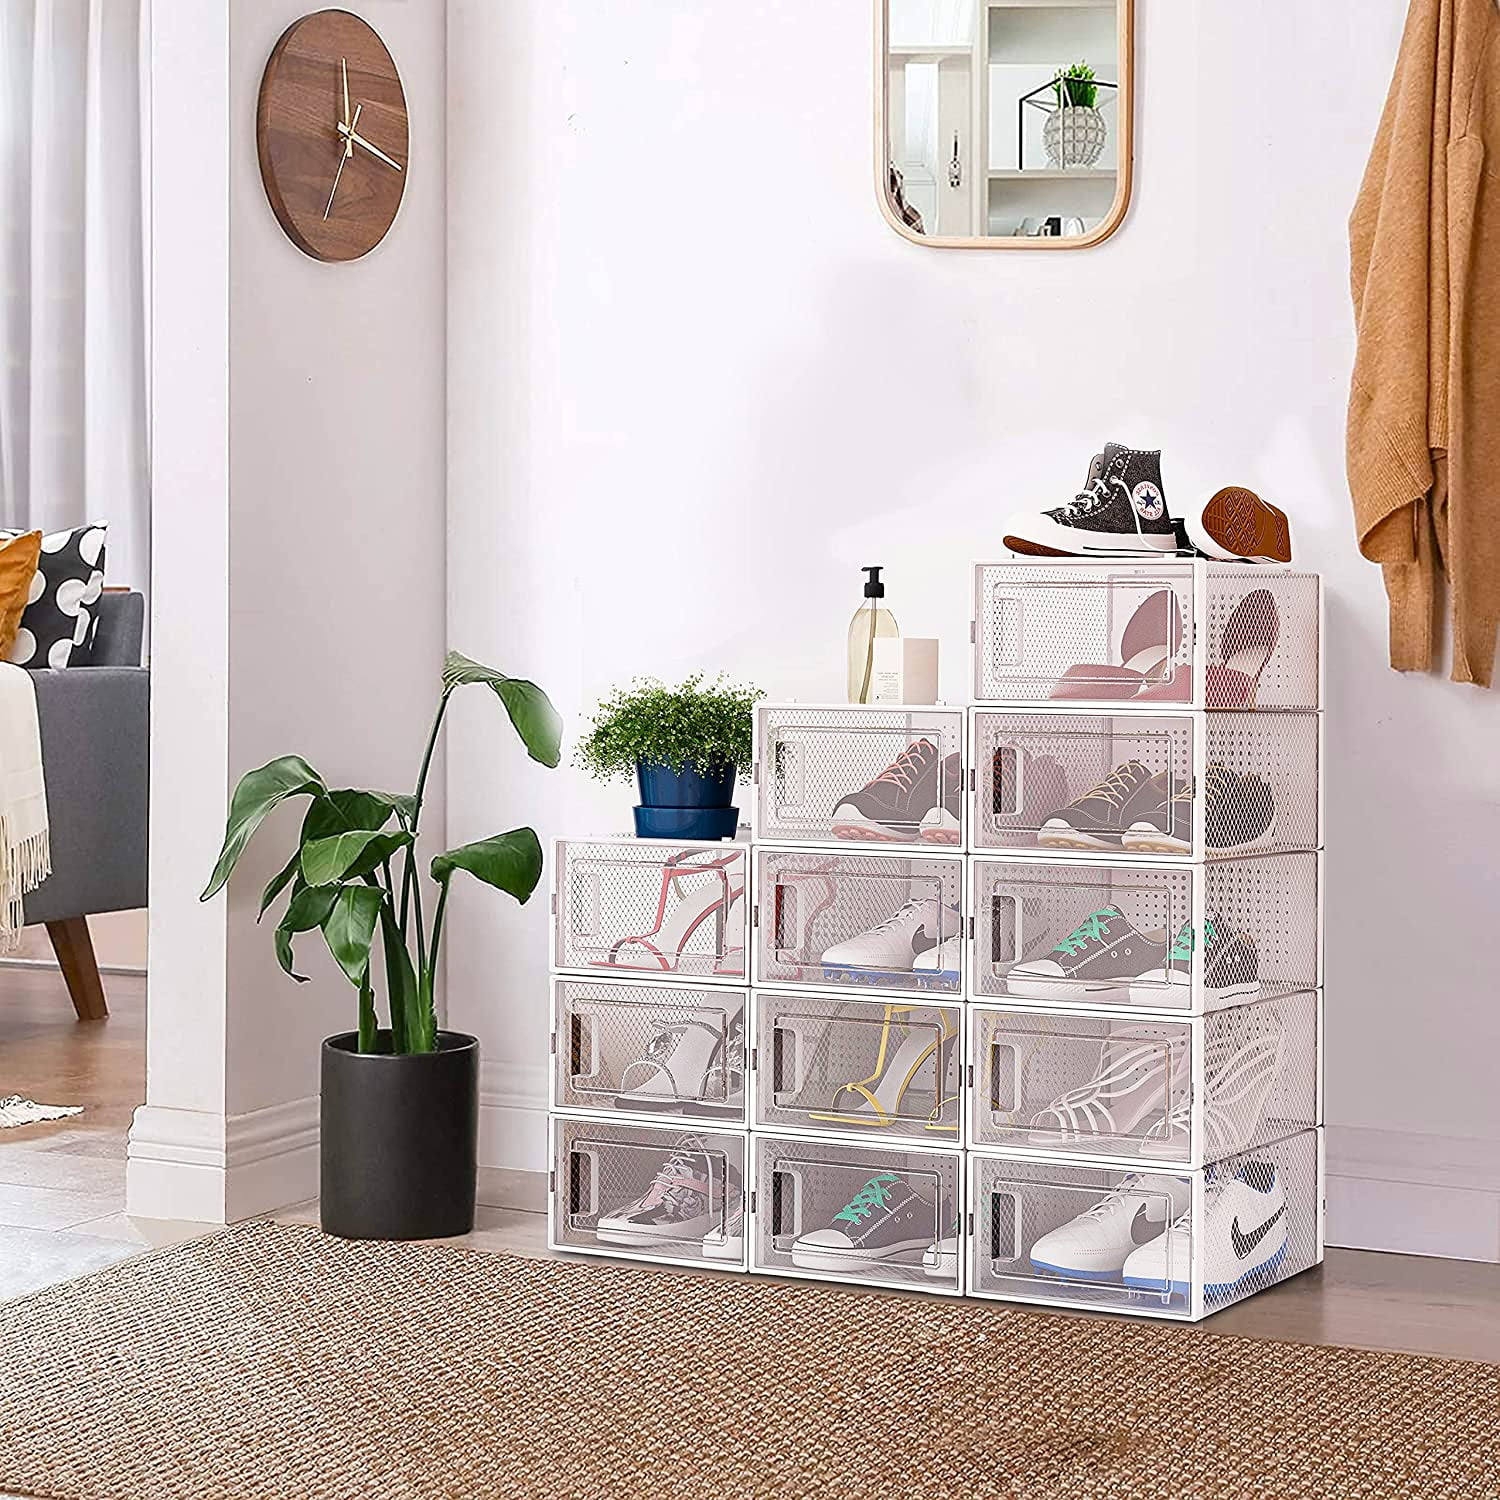 DEZENE Clear Shoe Storage Boxes: Pack of 6 Stackable Plastic Shoe Organizer  Containers for Closet, D…See more DEZENE Clear Shoe Storage Boxes: Pack of